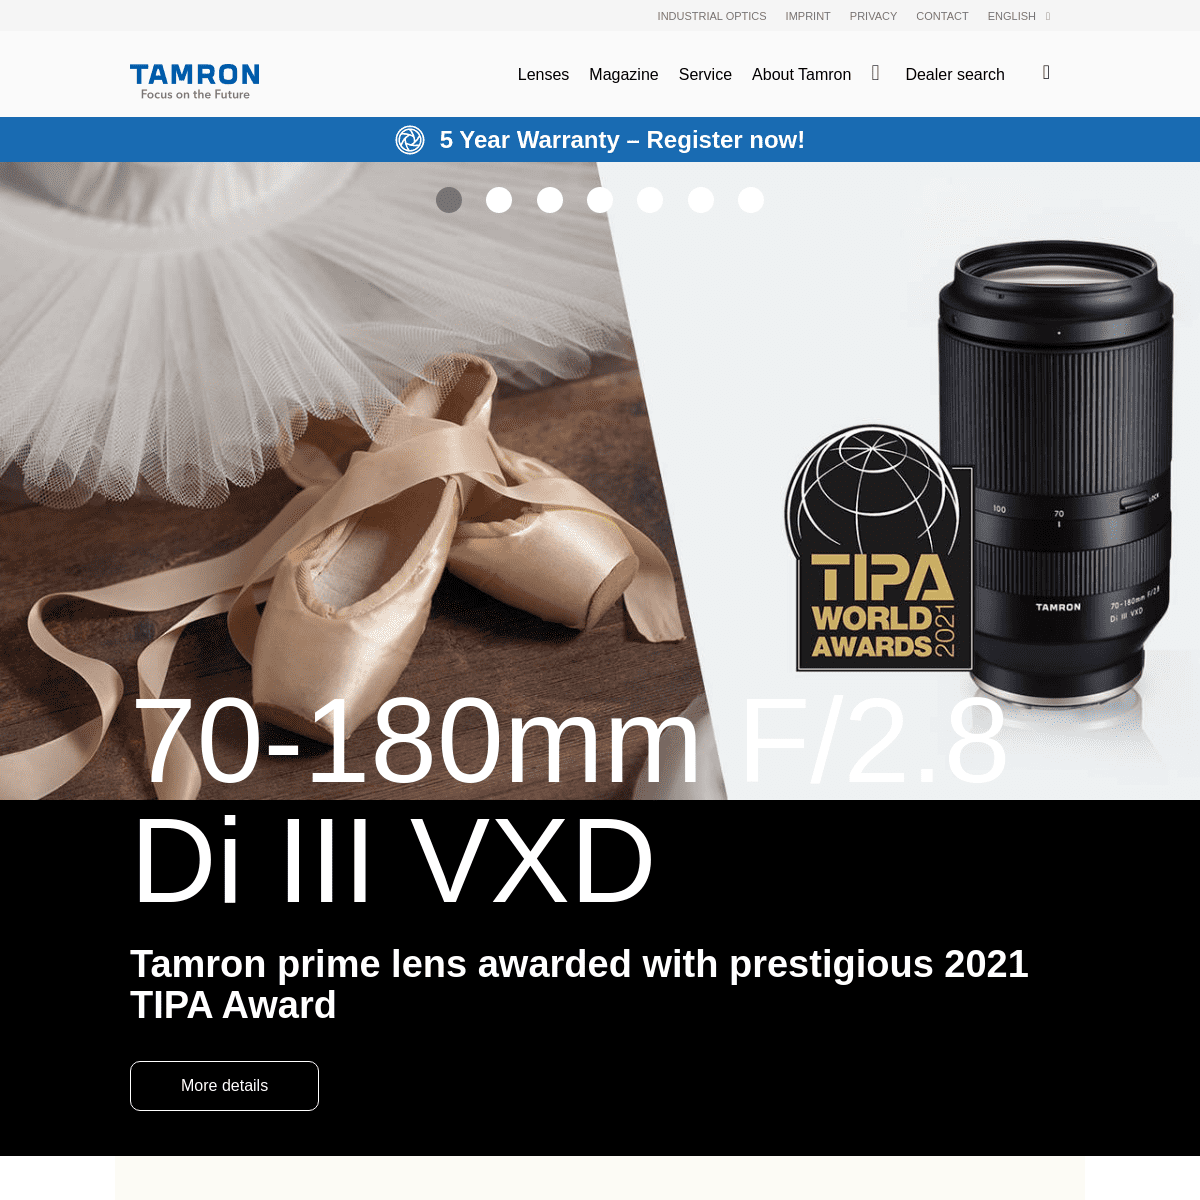 A complete backup of https://tamron.eu